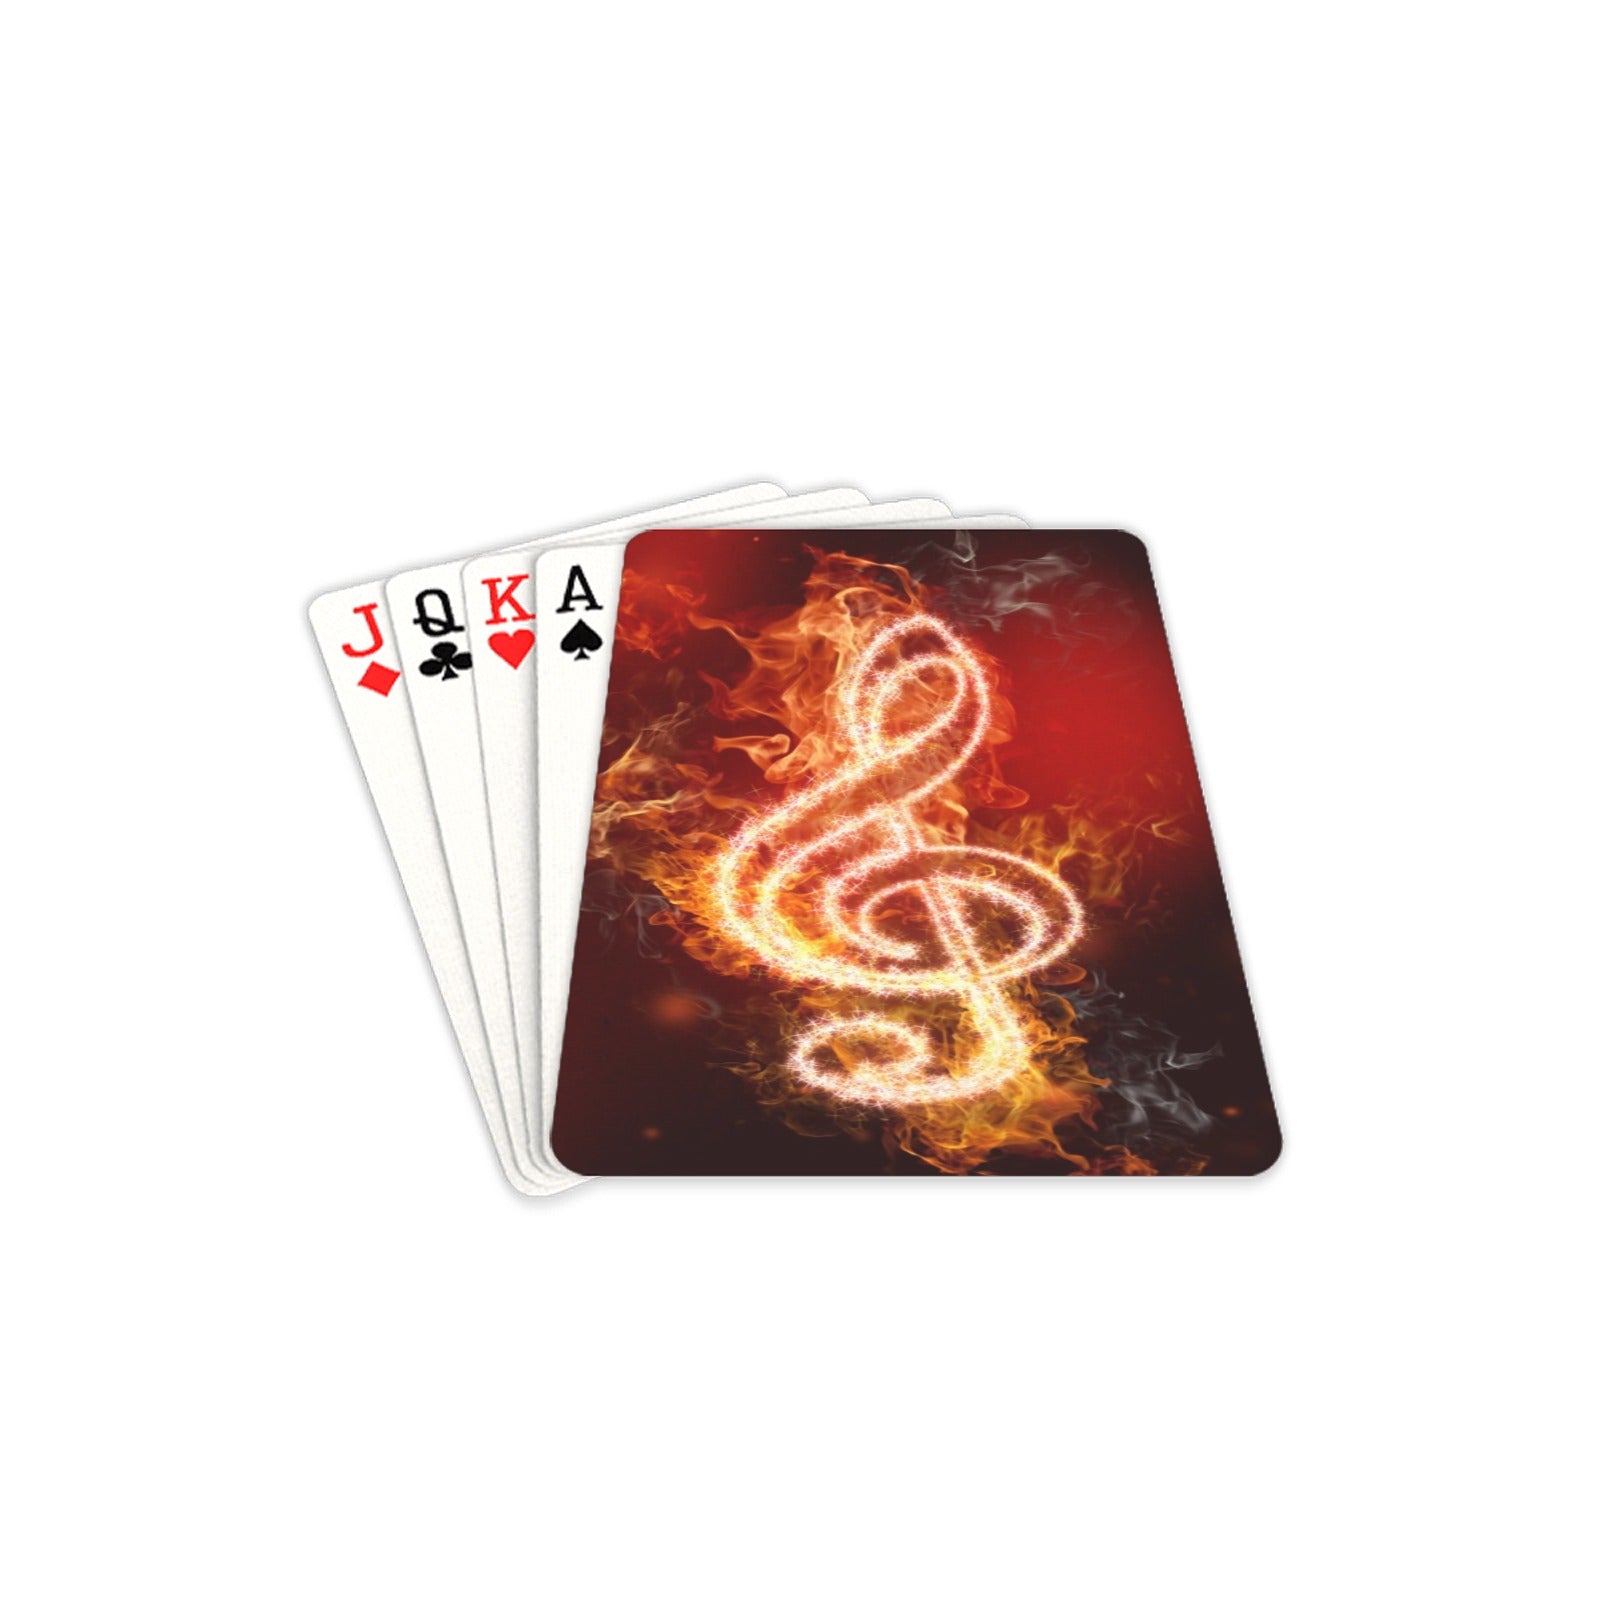 Treble Clef on Fire - Playing Cards 2.5"x3.5" Playing Card 2.5"x3.5"